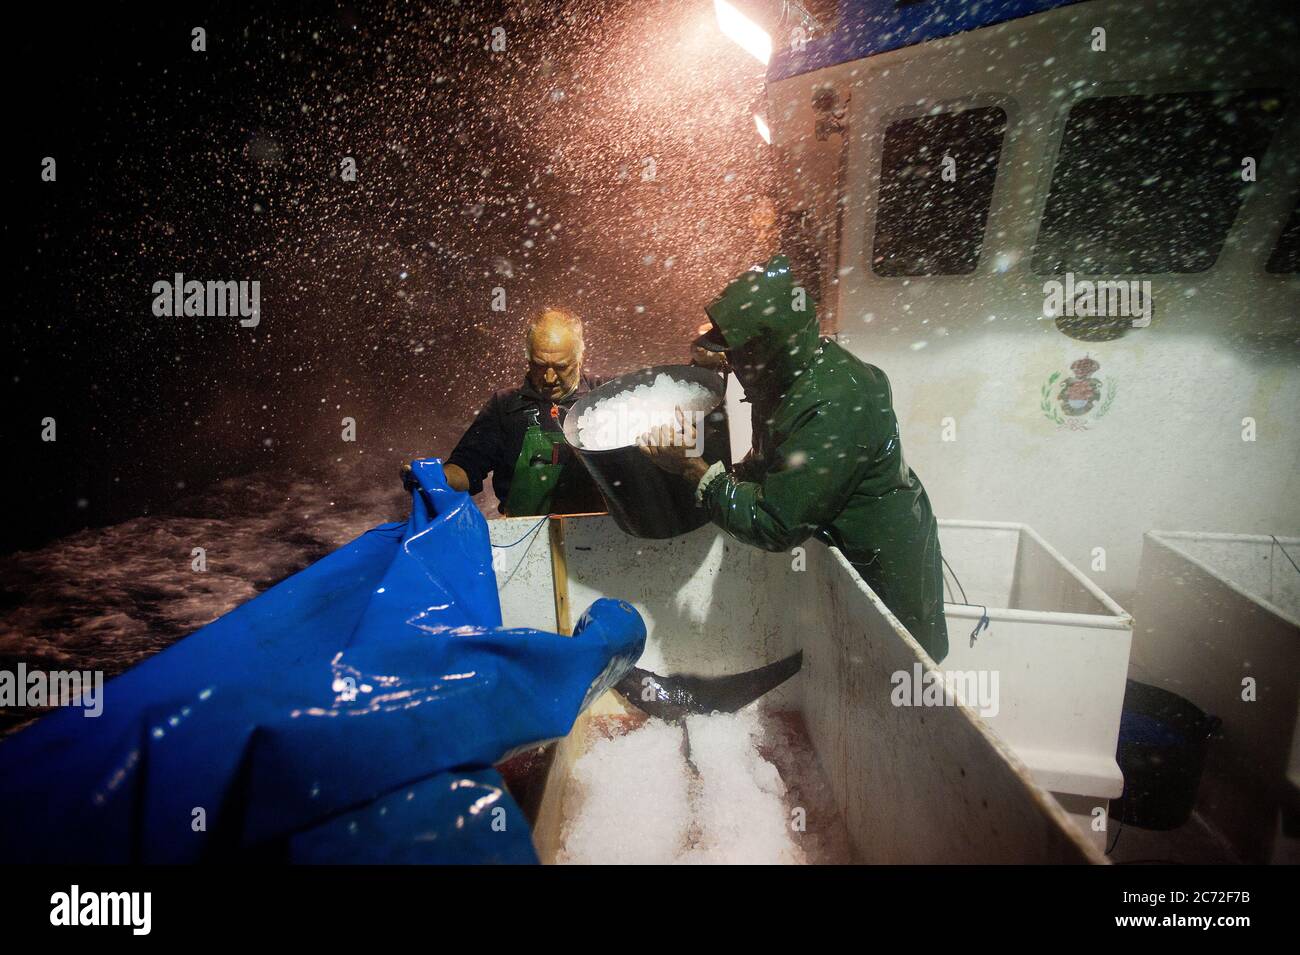 Juan Hernando and Mohammed, fishermen of the Fernandez y Moreno fishing boat, dump ice on top of the captured bluefin tuna (Thunnus thynnus) to keep the capture fresh until their arrival to port. Stock Photo